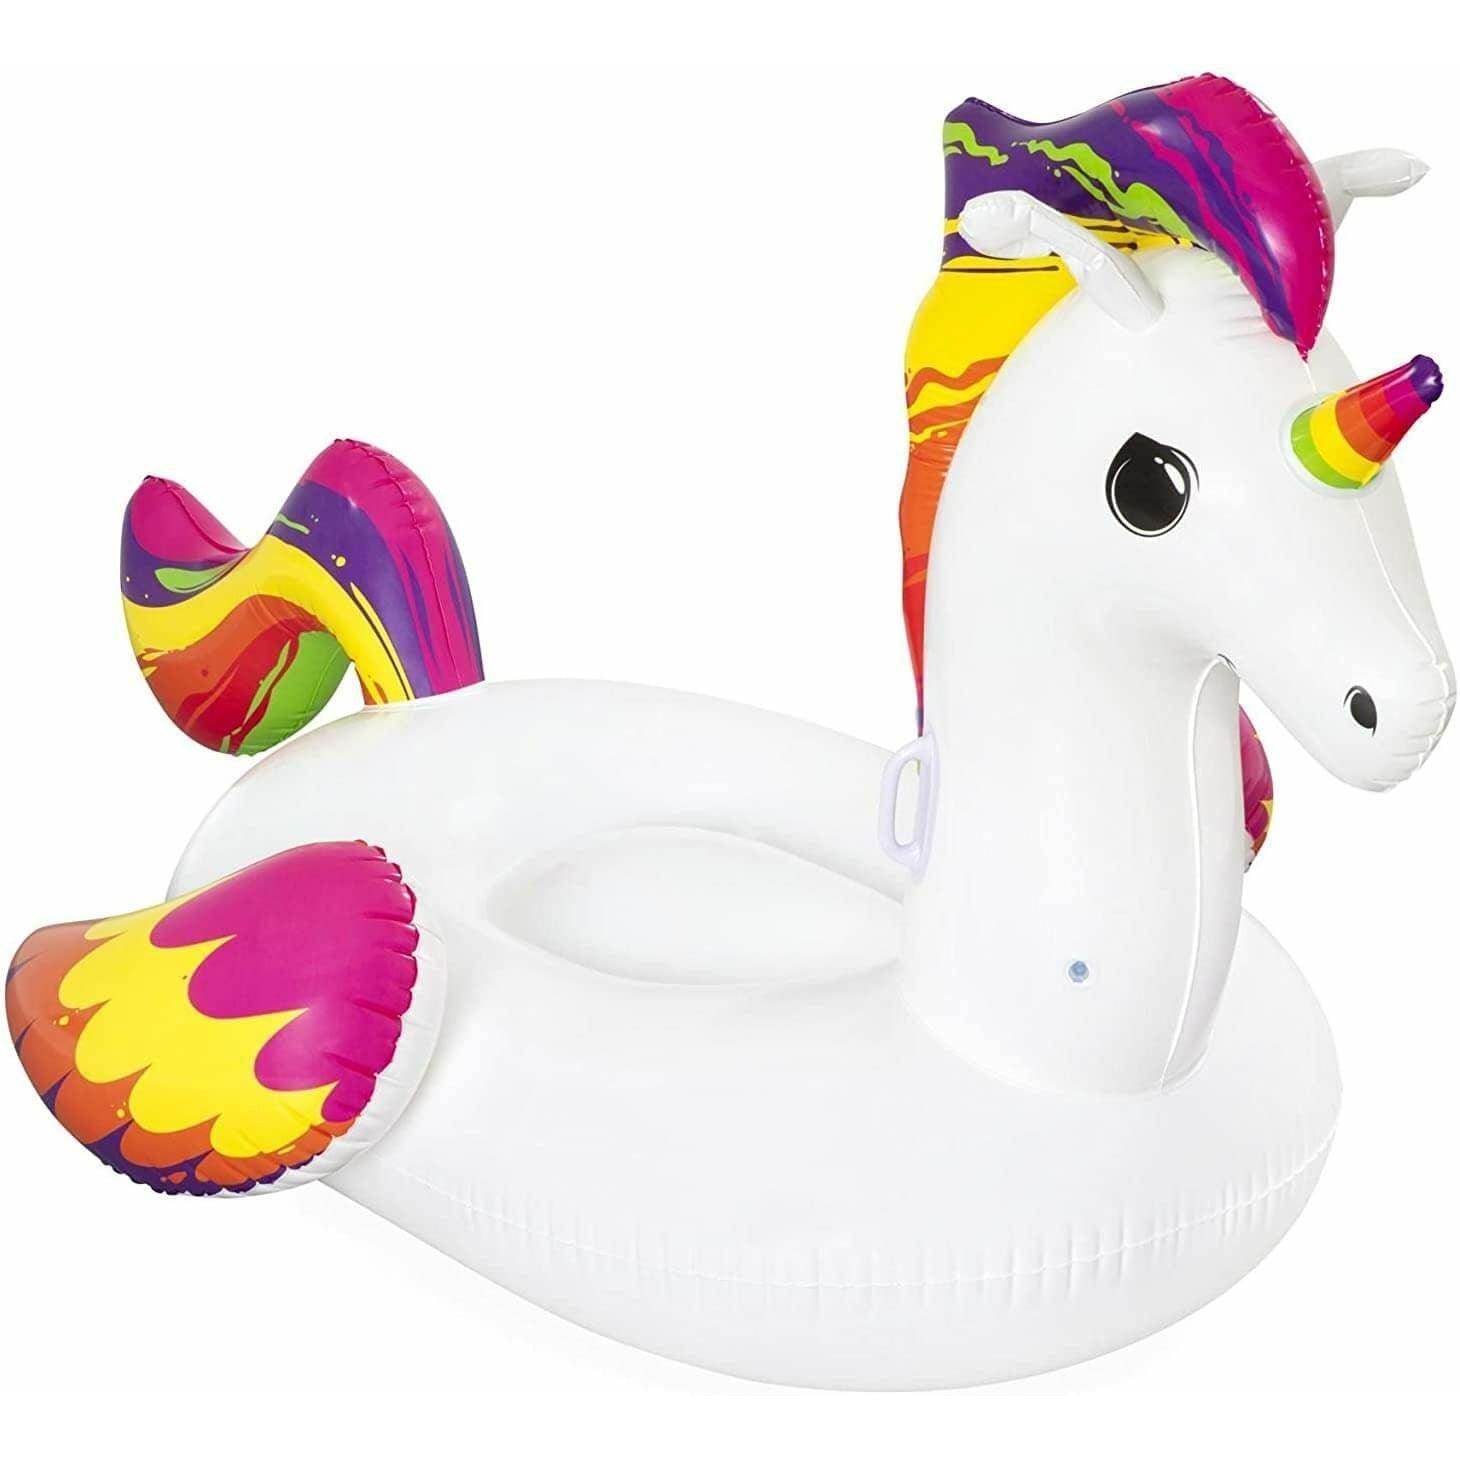 Bestway Unicorn-Shaped Inflatable Ride-On Float - Ourkids - Bestway